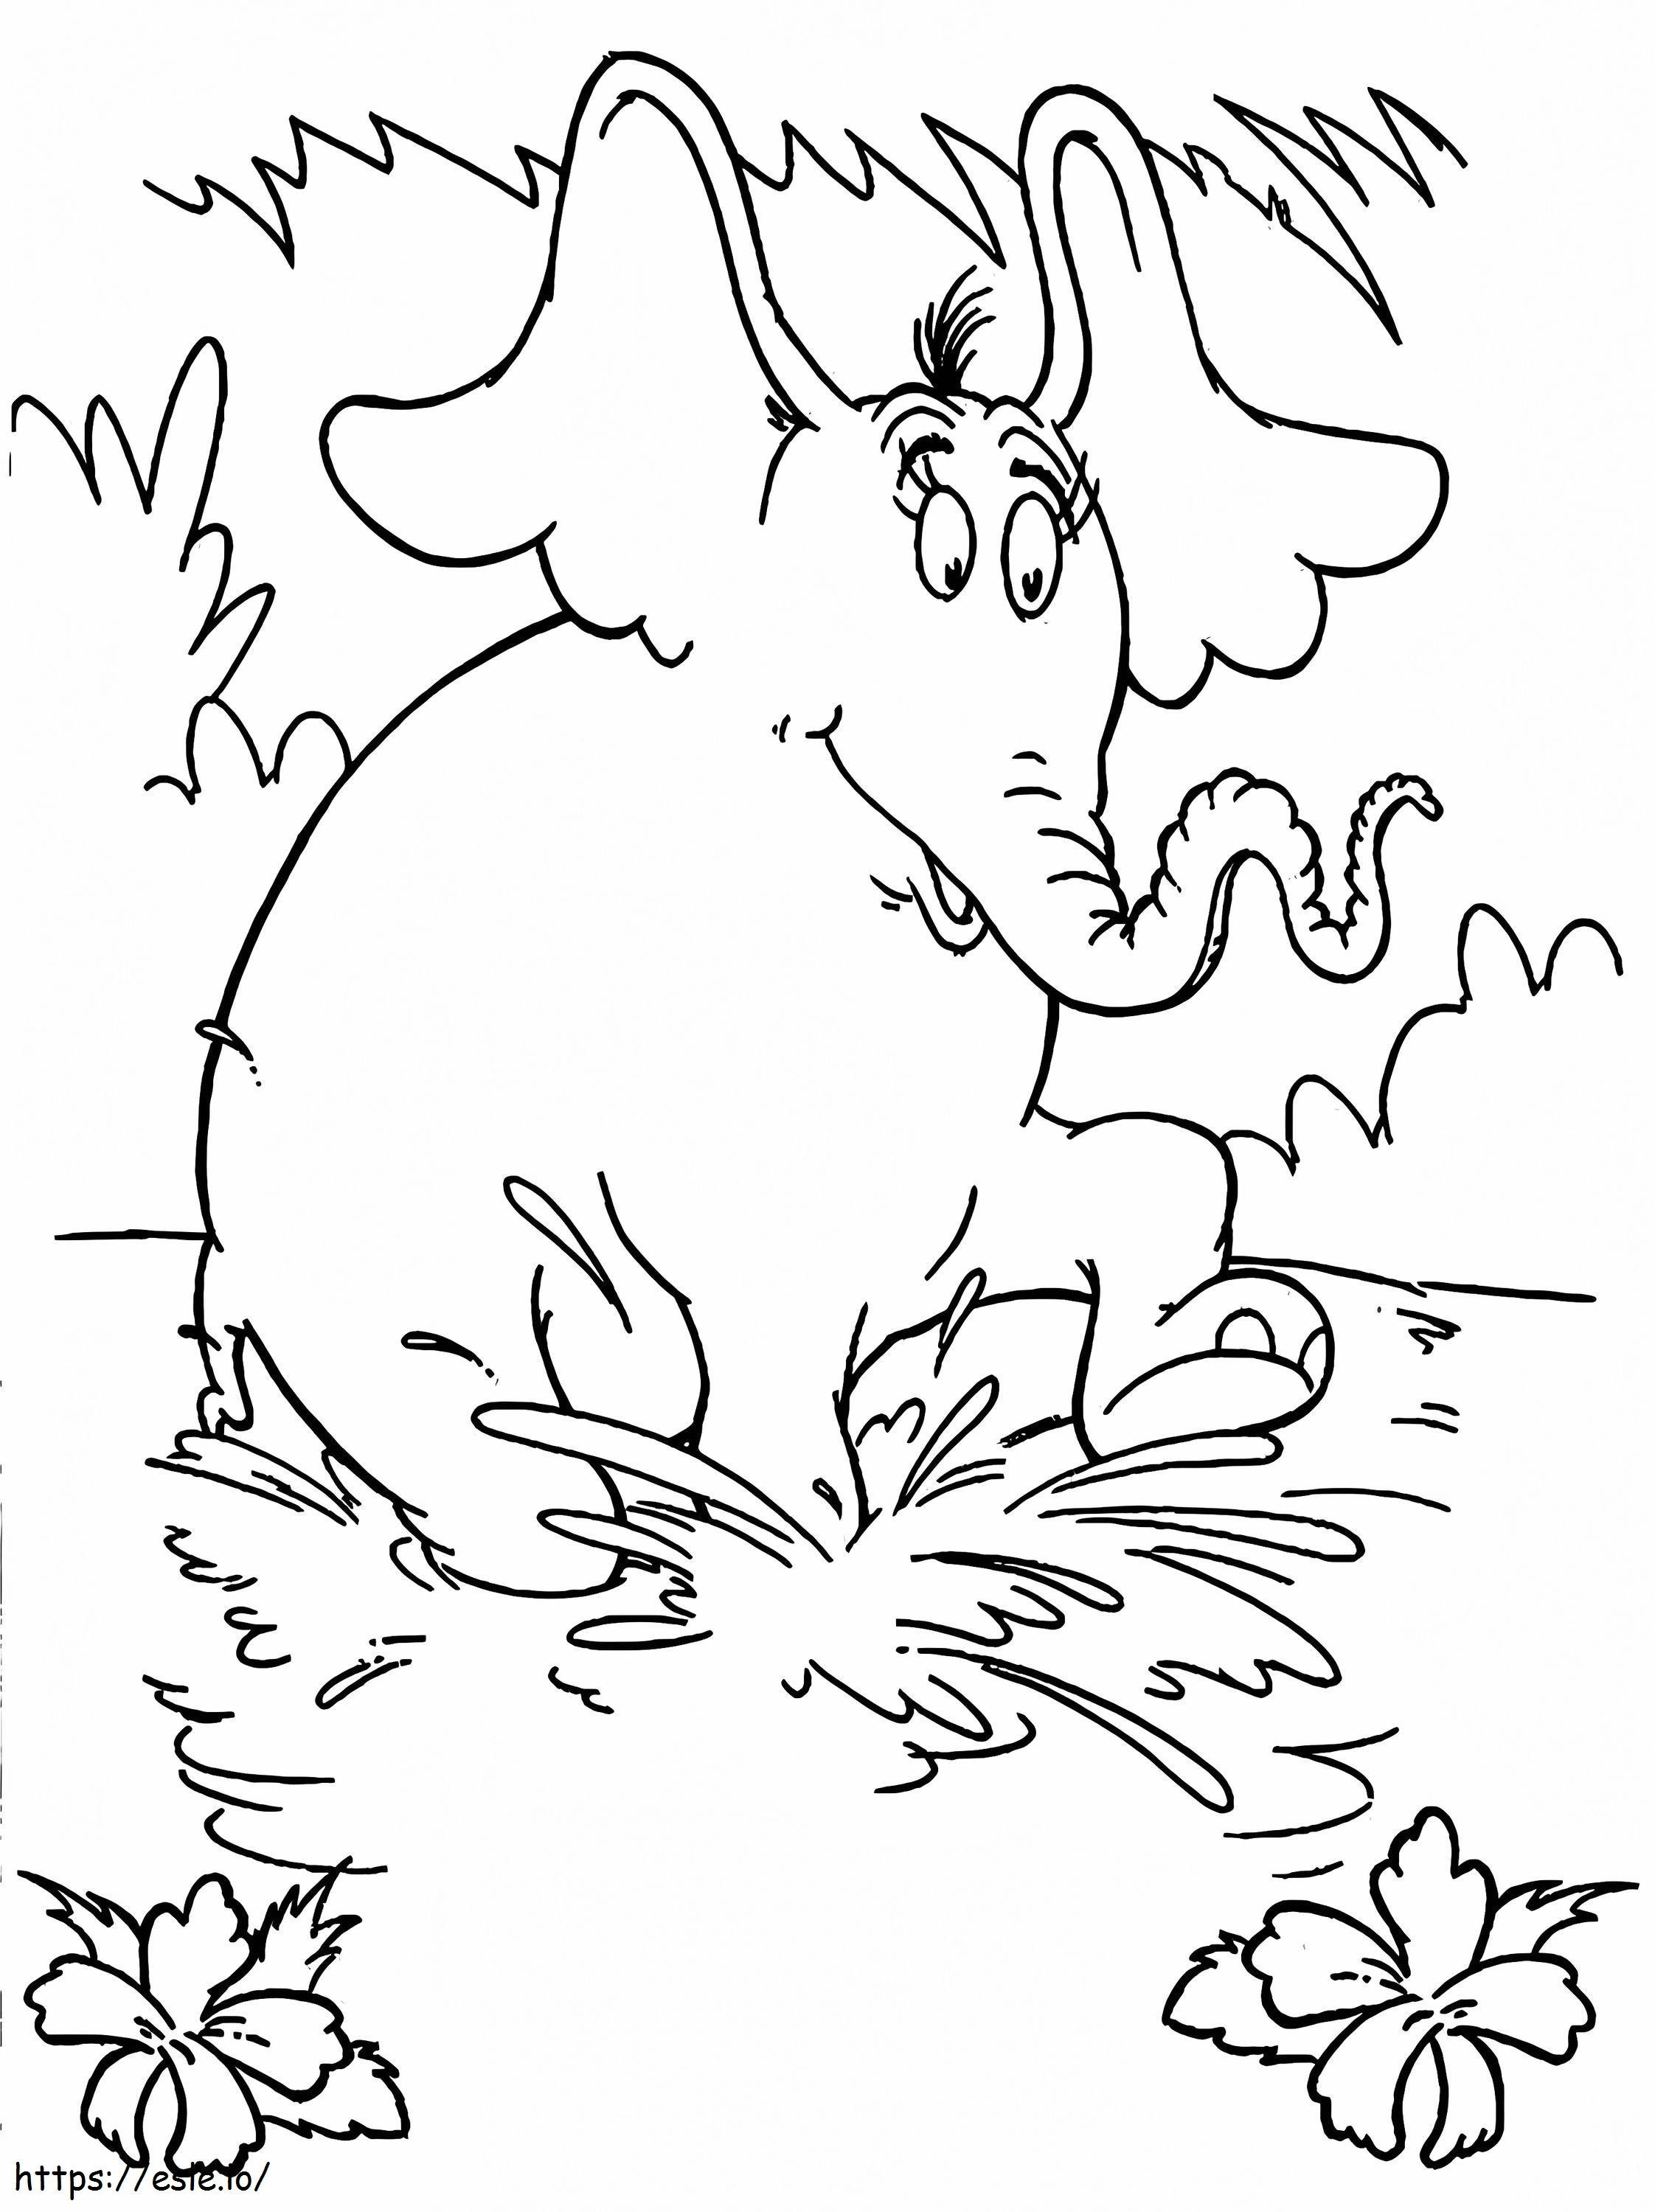 1580720429 Dr Seuss Color By Number Worksheets Kids Thing One And coloring page